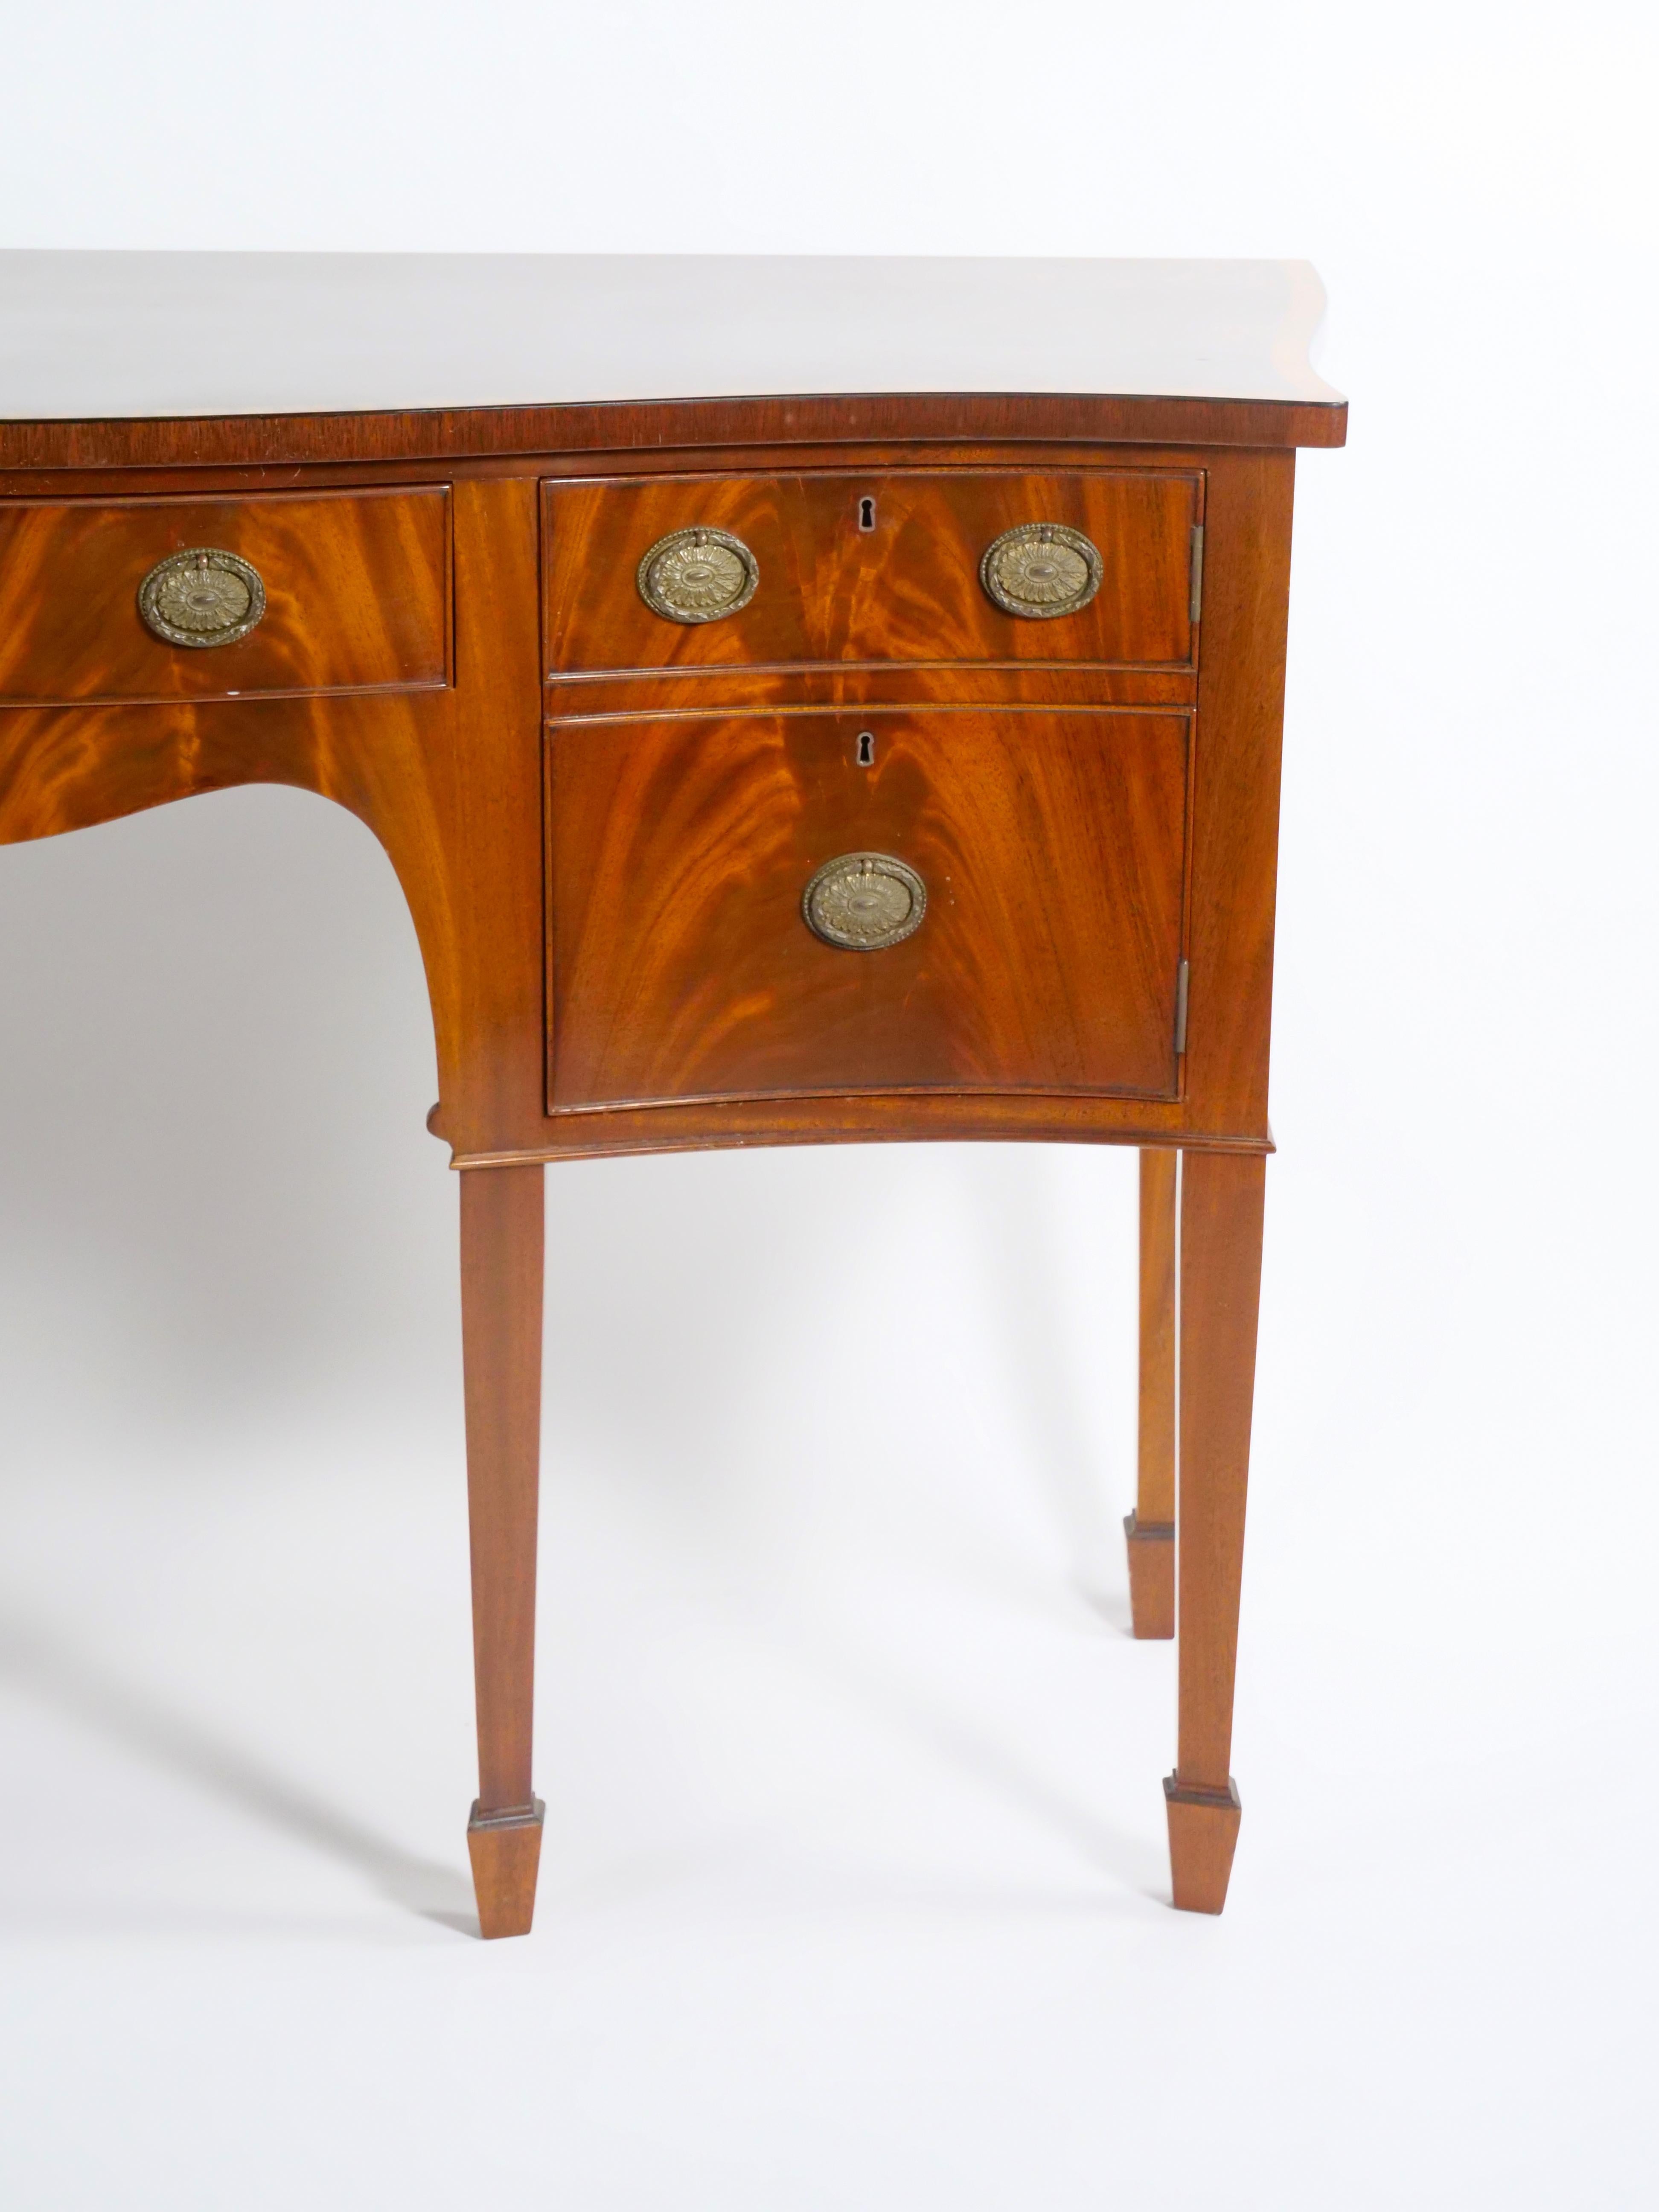 Early 20th Century George III Flame Mahogany Serpentine Sideboard / Server For Sale 3